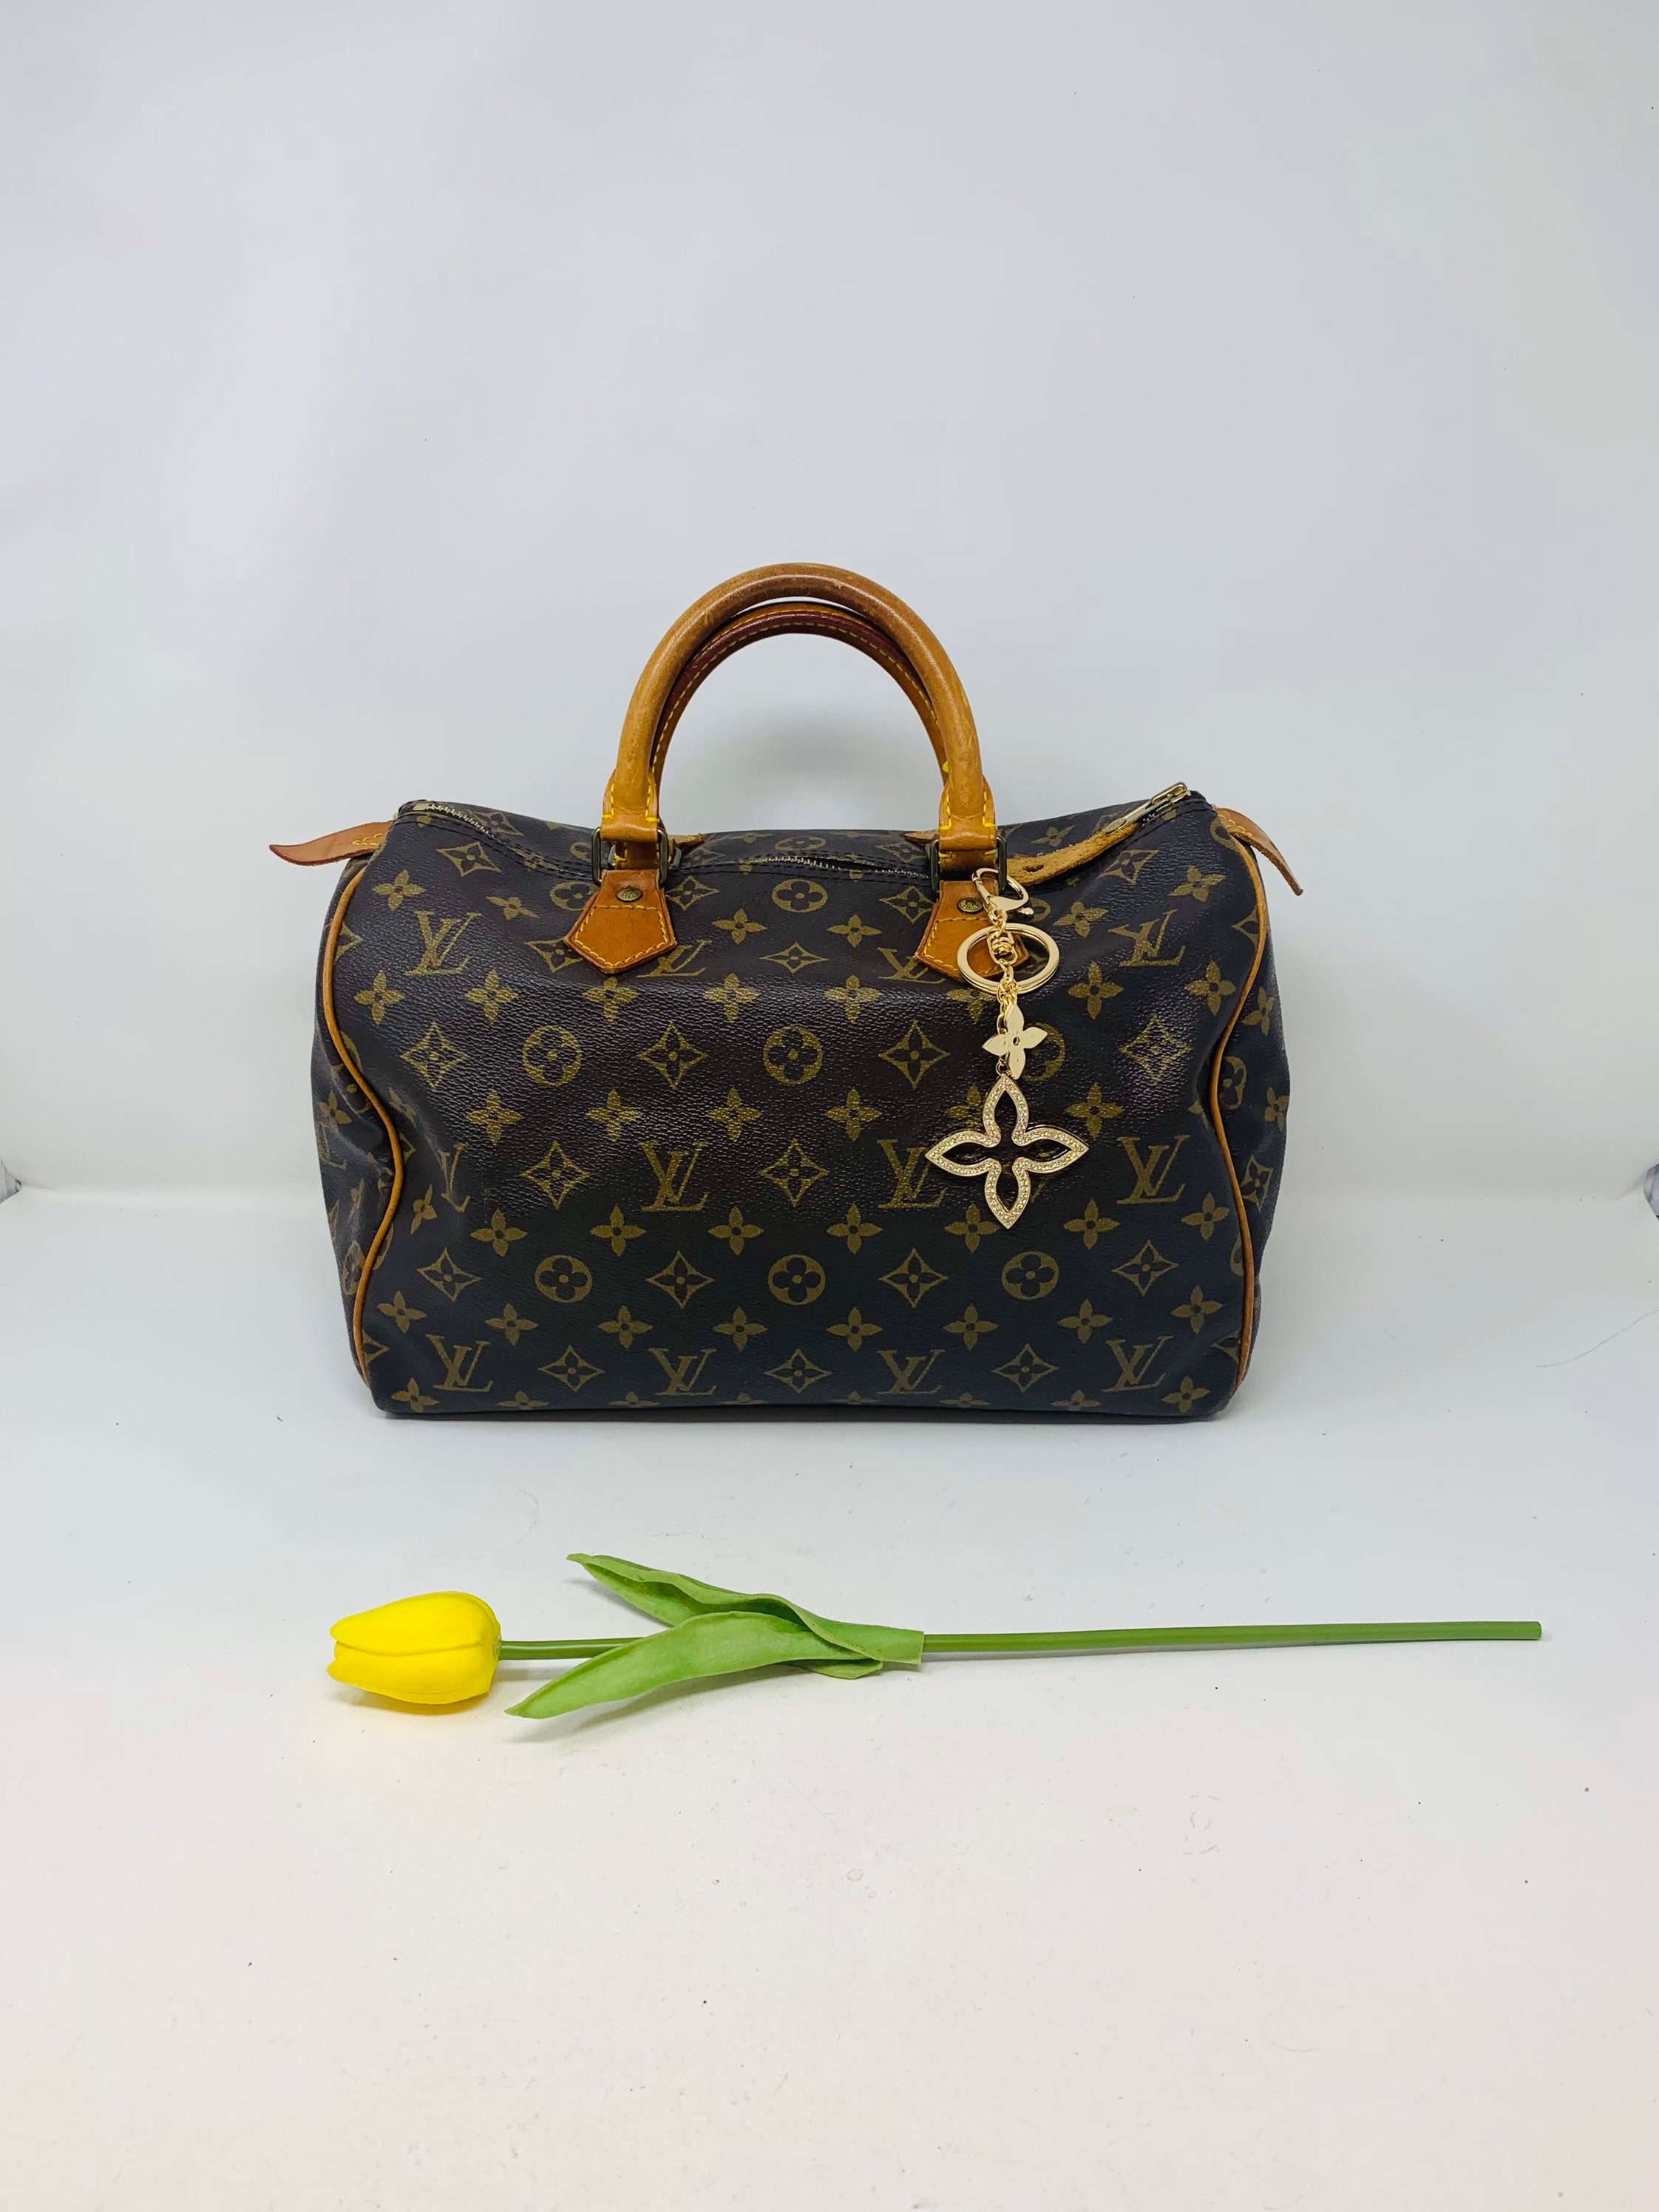 Satin Pillow Luxury Bag Shaper For Louis Vuitton Speedy 25/30/35/40  (Champagne) - More colors available